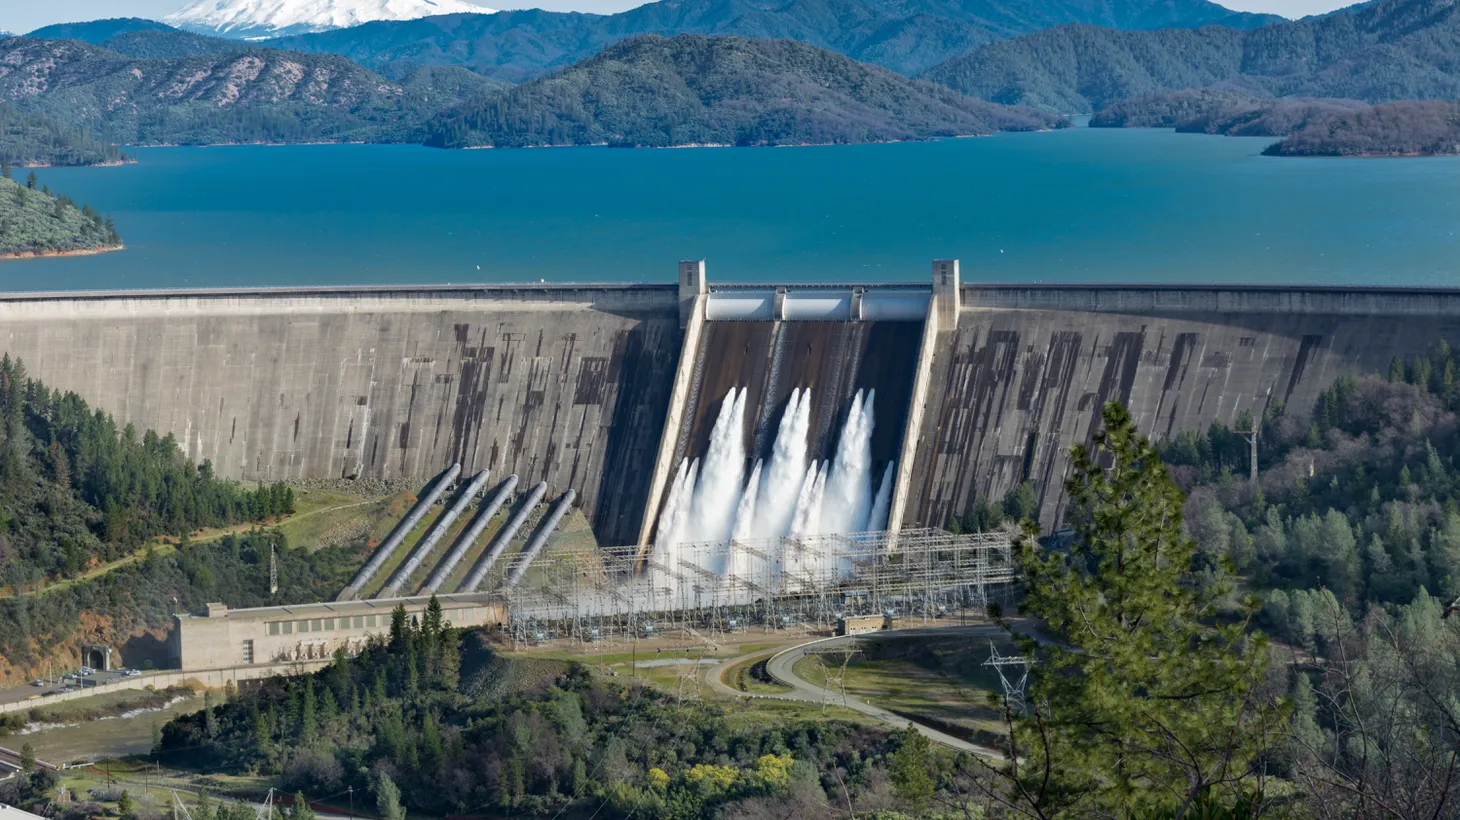 The Shasta Dam is located in Northern California.